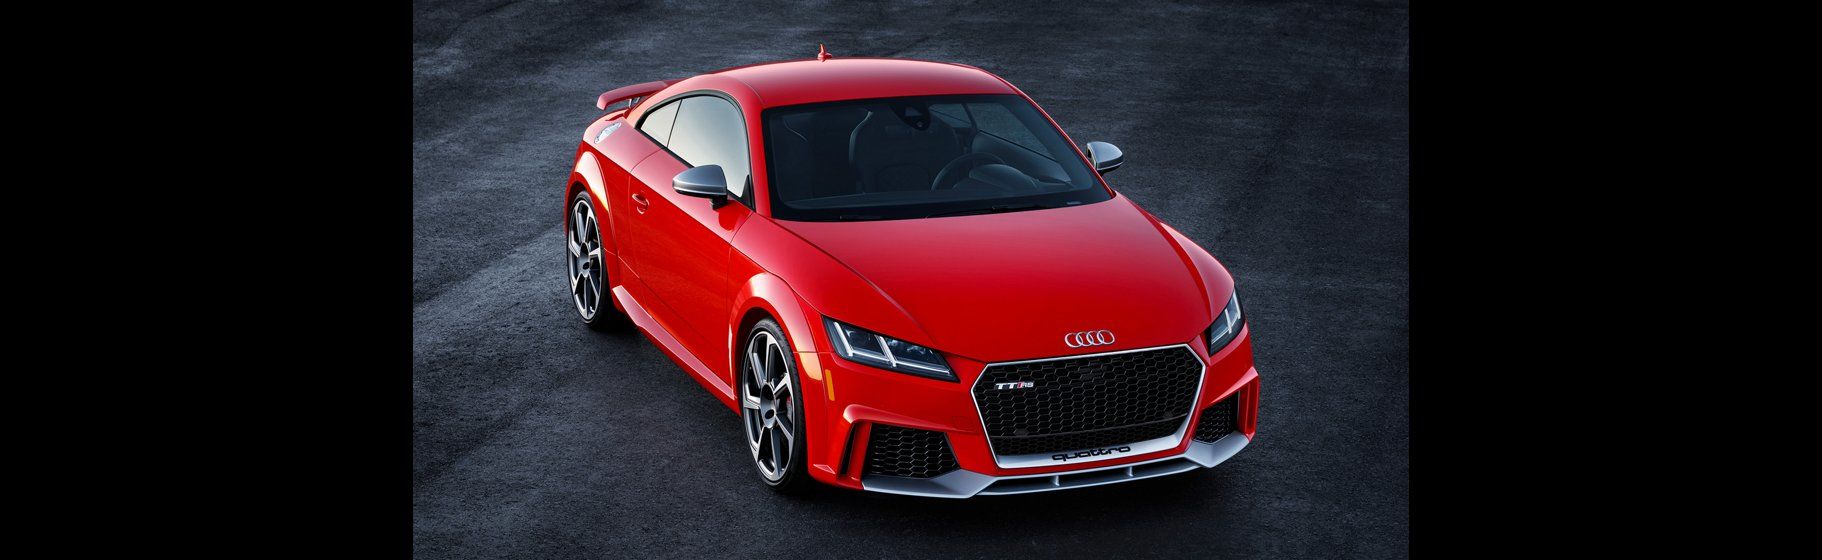 The AUDI TT RS is one of the contenders on Motor Trend's Best Driver's Car list. (Courtesy Audi)